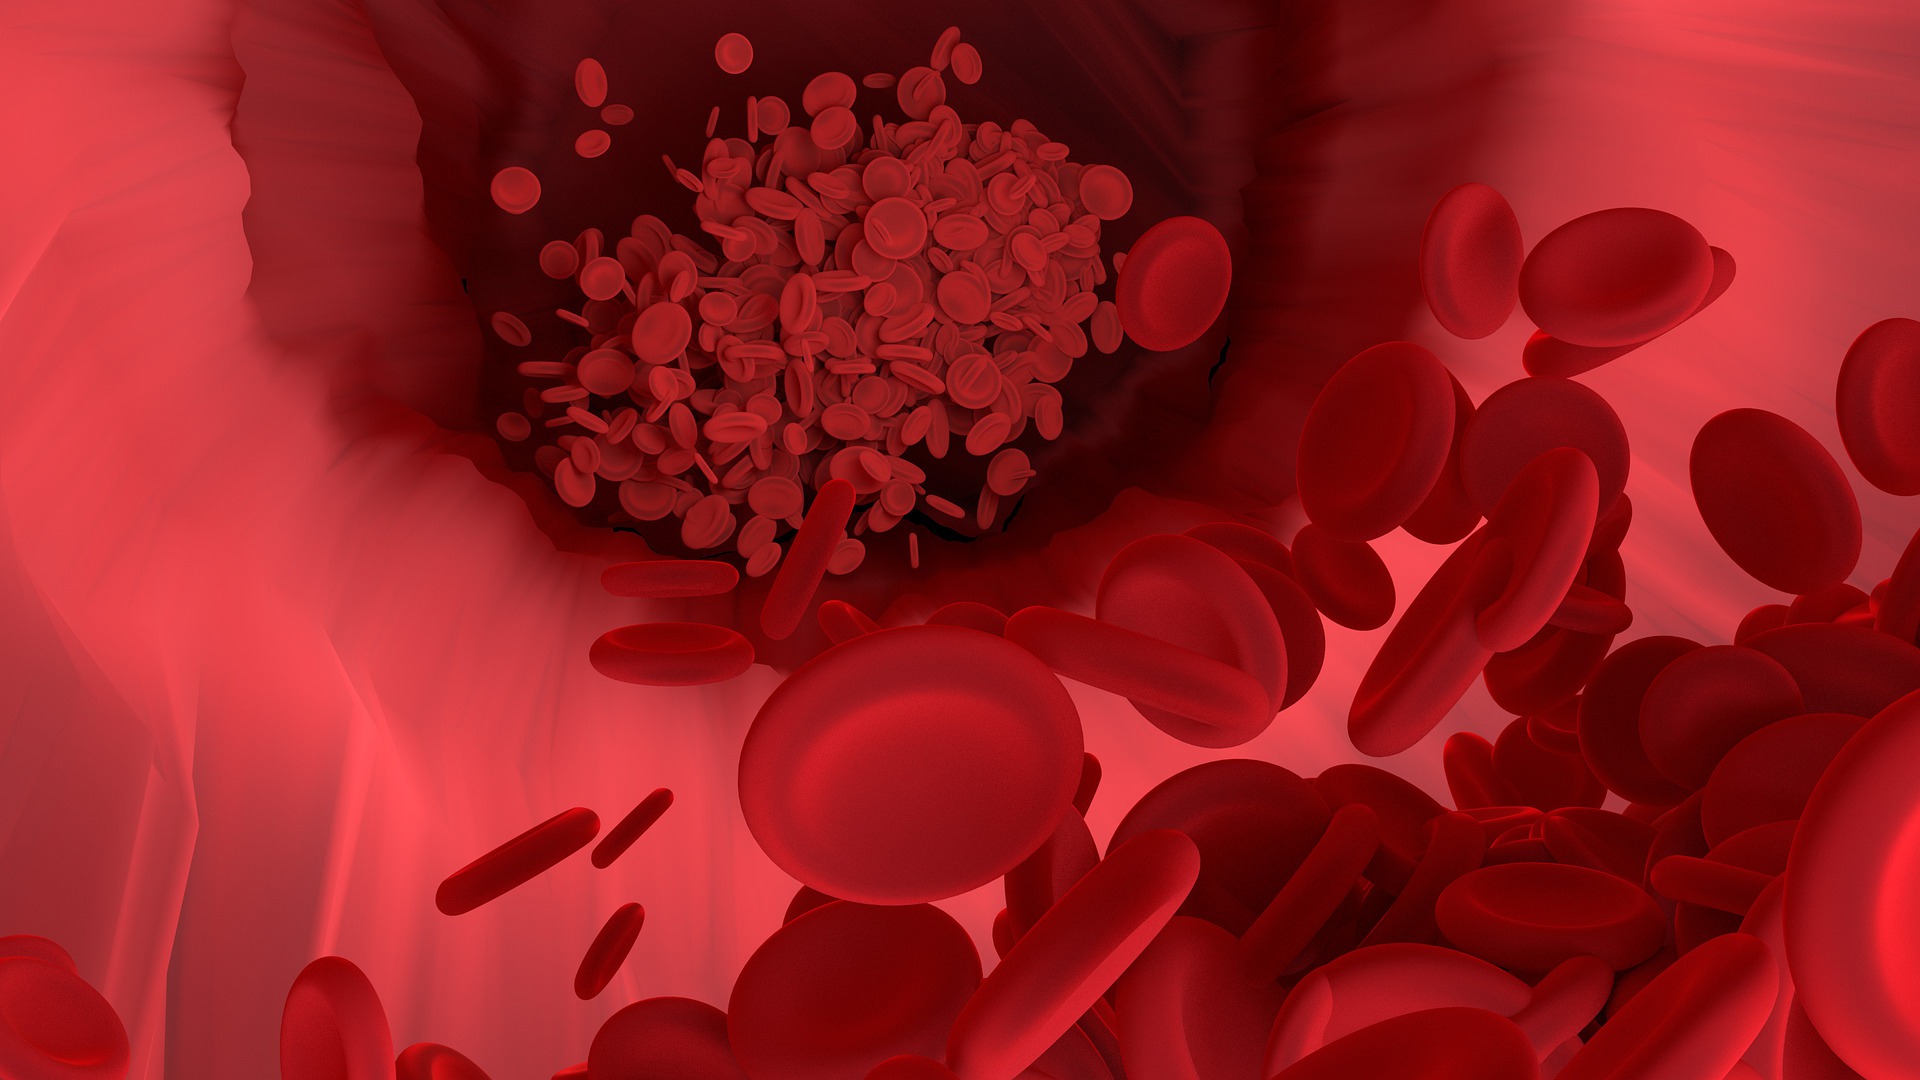 red-blood-cell-4302093_1920